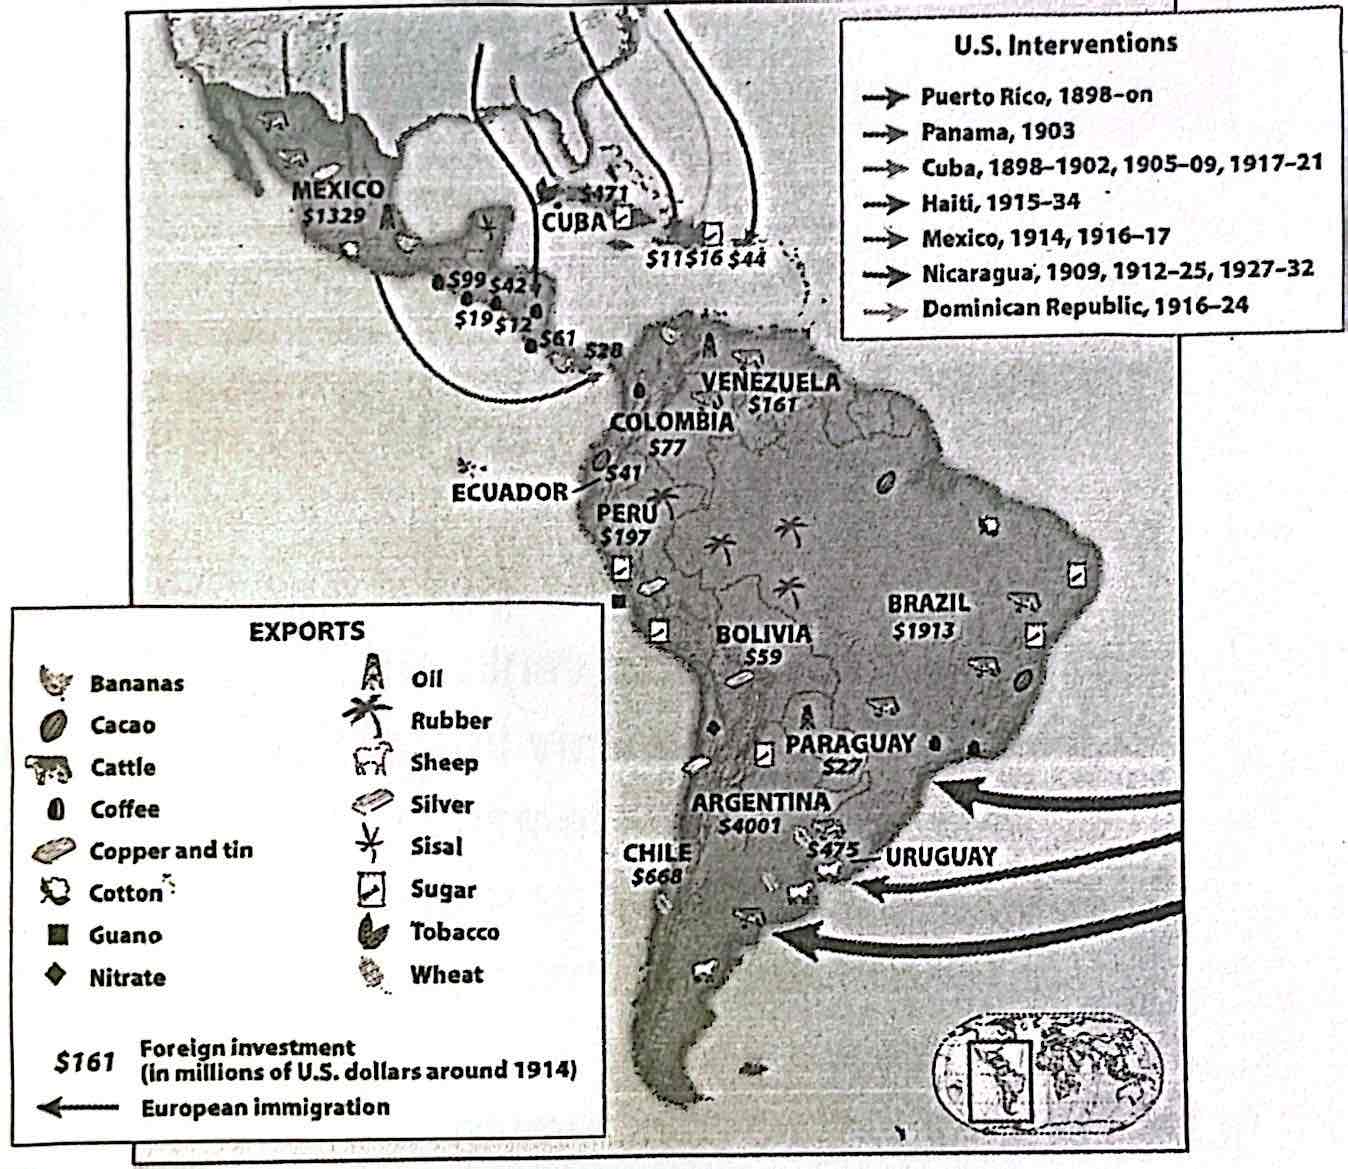 <p><strong>8-11. </strong>Which of the following can be inferred from the information provided in the map above?</p><p>a) Economic development in Latin America was dependent on foreign capital and export of raw materials<br>b) Trade with the U.S. jump-started a thorough process of industrialization across Latin America<br>c) European indentured servants became the largest underclass in Latin America<br>d) Bolivia was the most dependent on U.S. military intervention to maintain its economy</p>